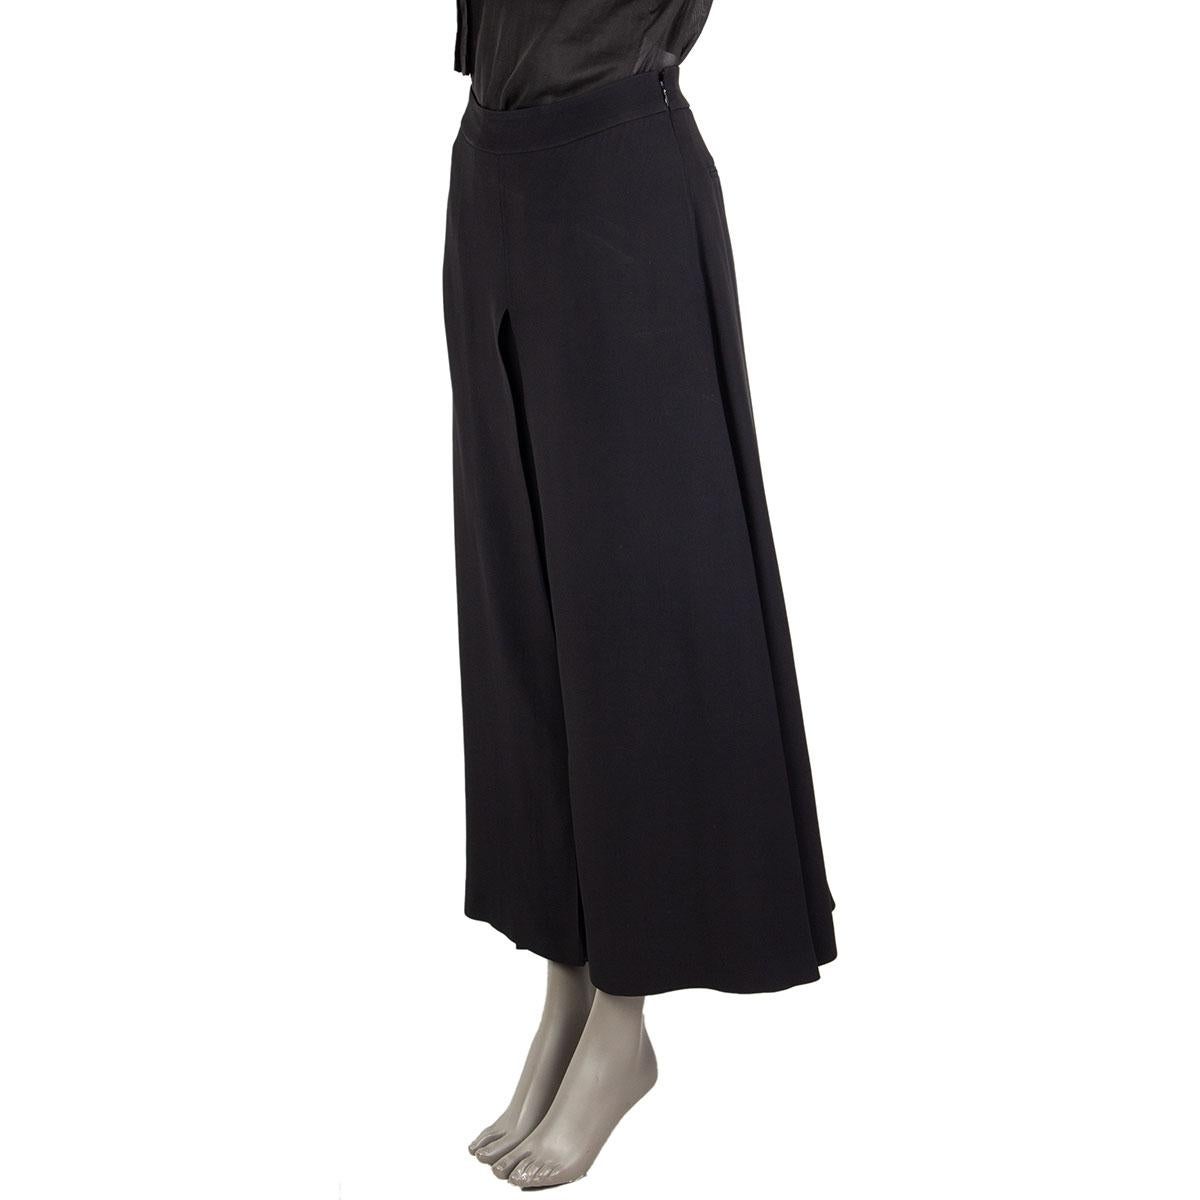 100% authentic Valentino culotte pleated pants in black acetate (57%) and viscose (43%) with a pleat in the mid-front and at the sides. Closes with one hook and a concealed zipper at the left side. Unlined. Has been worn and is in excellent